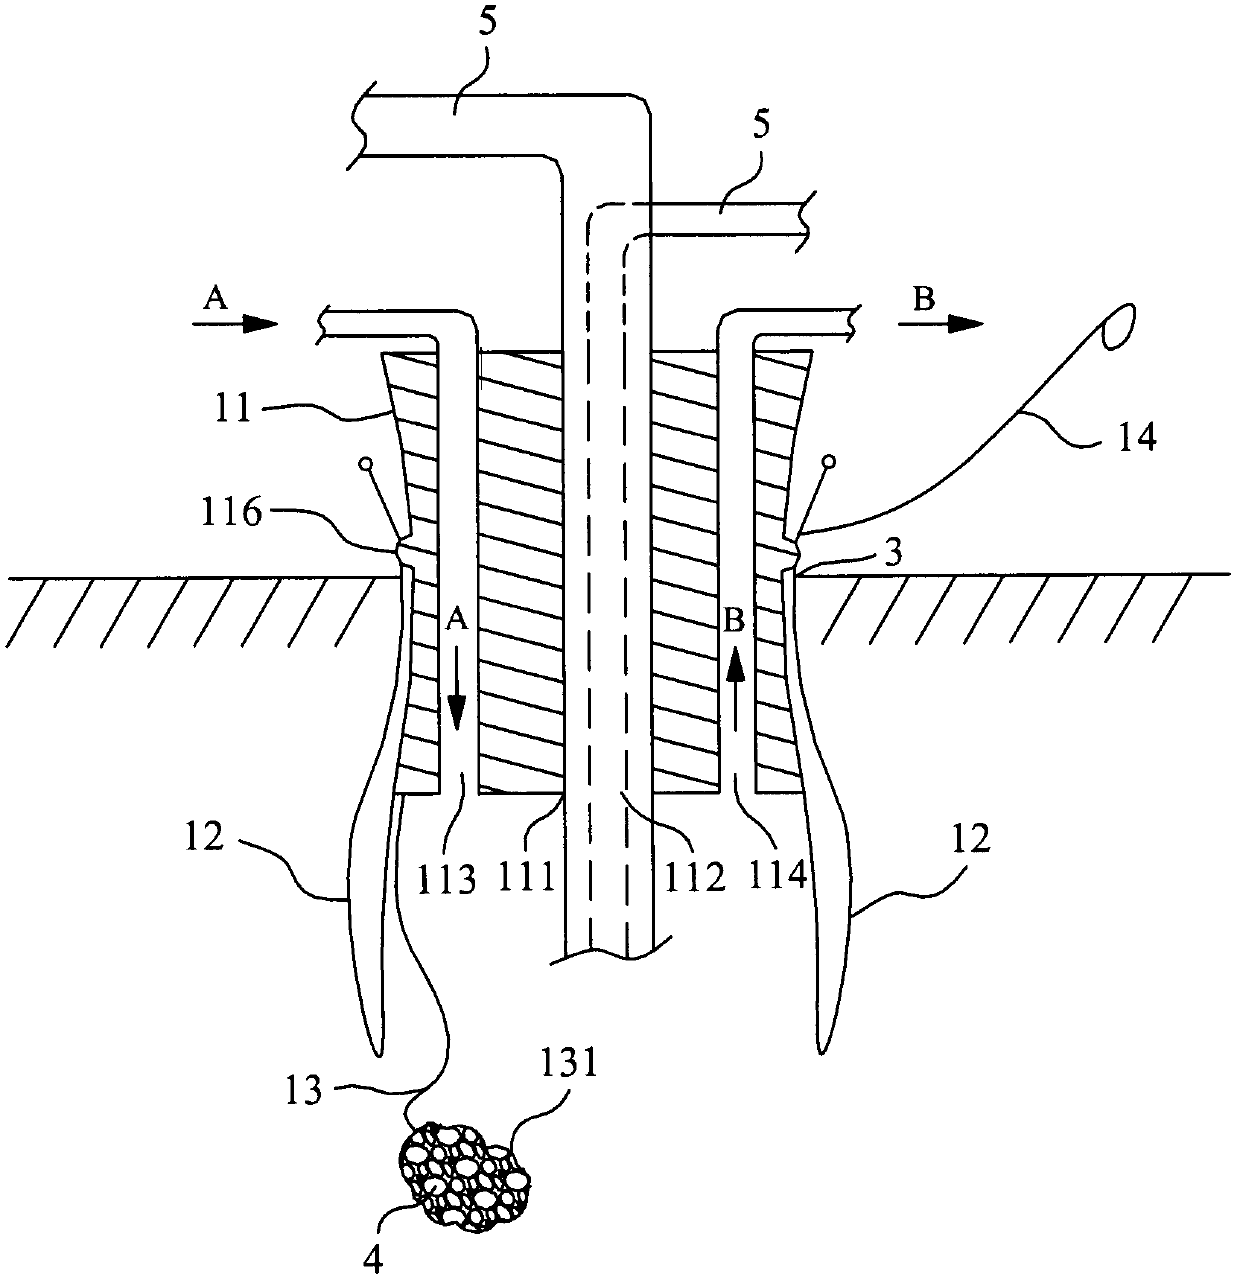 Incision protector capable of scar hiding for minimal invasive surgery and minimal invasive surgery component adopting same